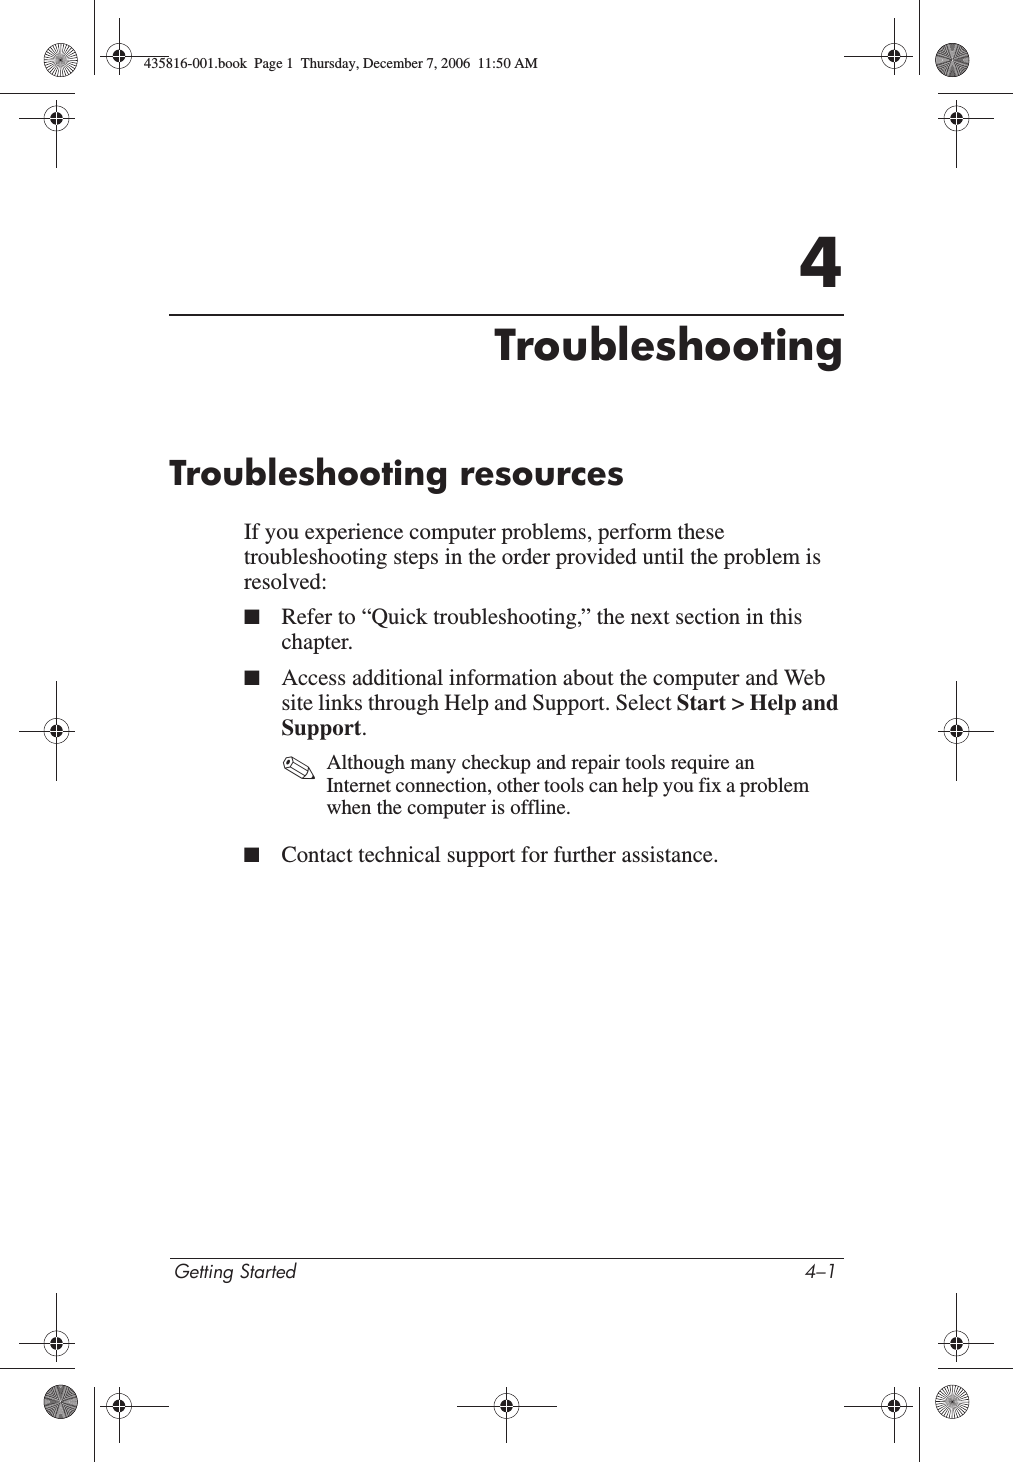 Getting Started 4–14TroubleshootingTroubleshooting resourcesIf you experience computer problems, perform these troubleshooting steps in the order provided until the problem is resolved:■Refer to “Quick troubleshooting,” the next section in this chapter.■Access additional information about the computer and Web site links through Help and Support. Select Start &gt; Help and Support.✎Although many checkup and repair tools require an Internet connection, other tools can help you fix a problem when the computer is offline.■Contact technical support for further assistance.435816-001.book  Page 1  Thursday, December 7, 2006  11:50 AM